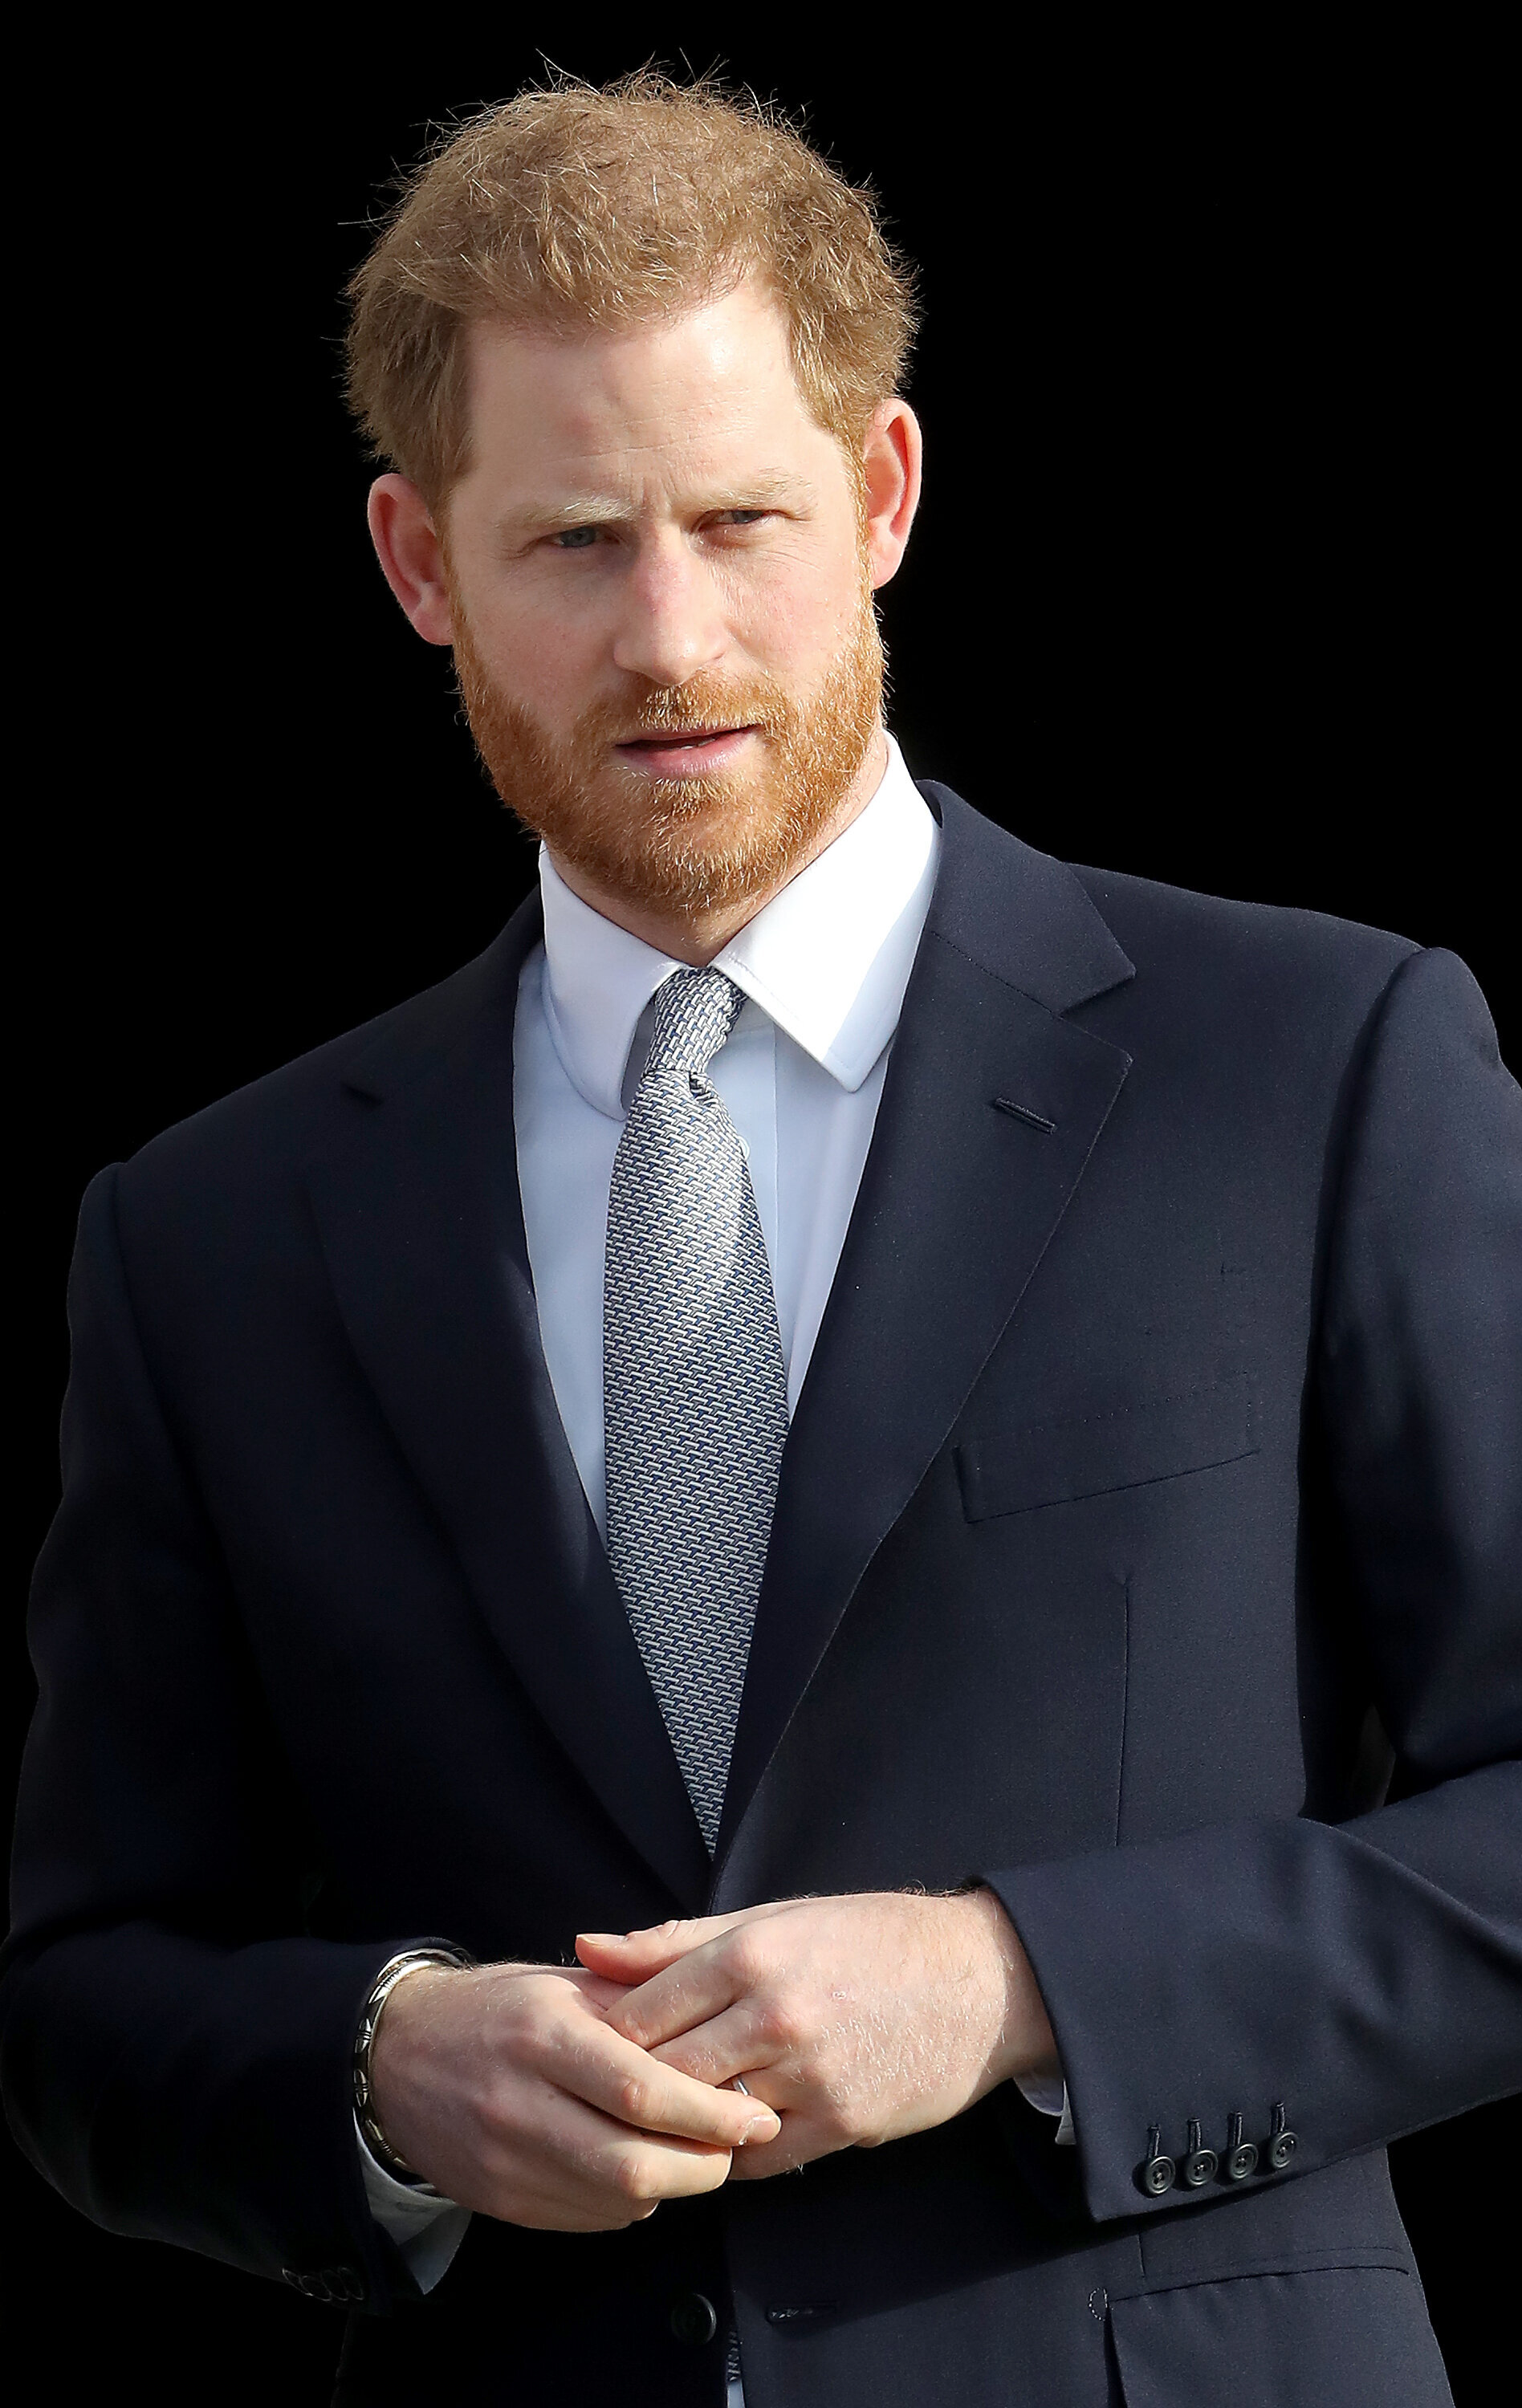 Prince Harryâ€™s Latest Instagram May Contain A Hidden Message